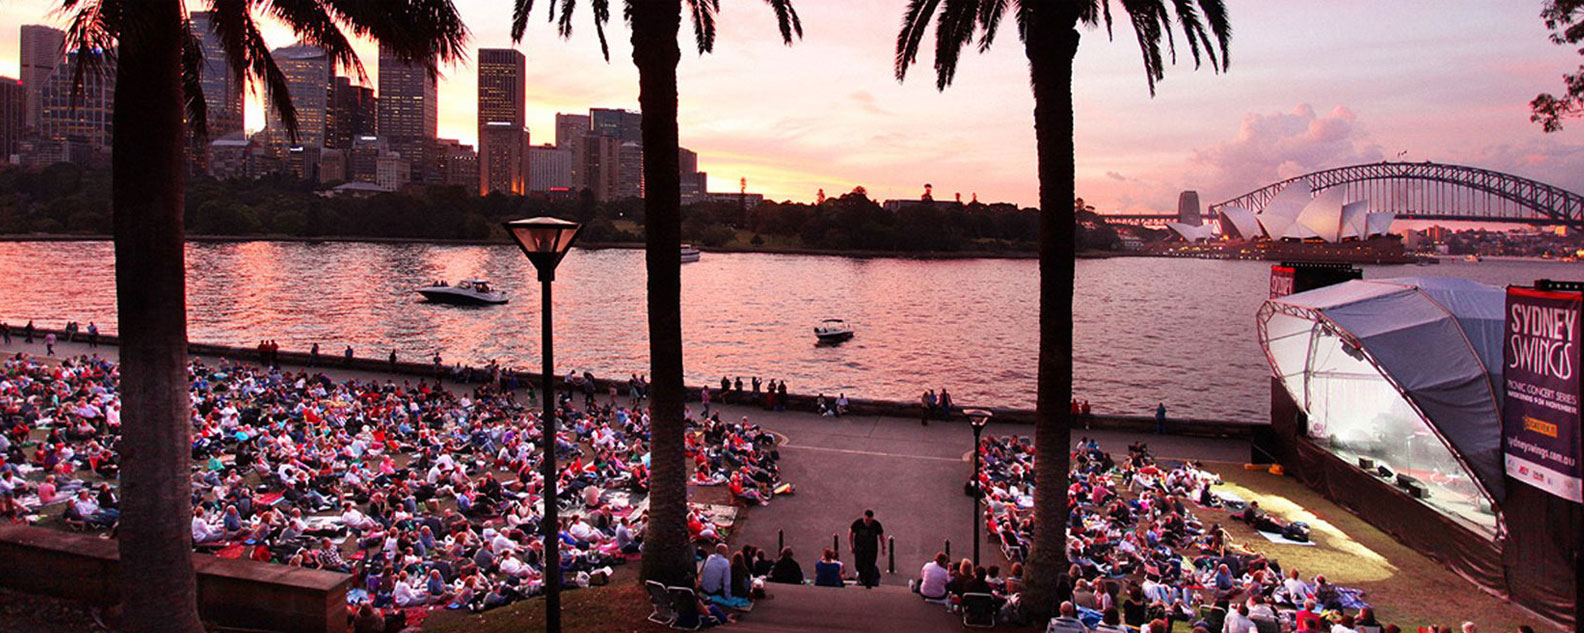 A crowd watching a concert in the Domain at sunset with harbour and harbour bridge in the background.